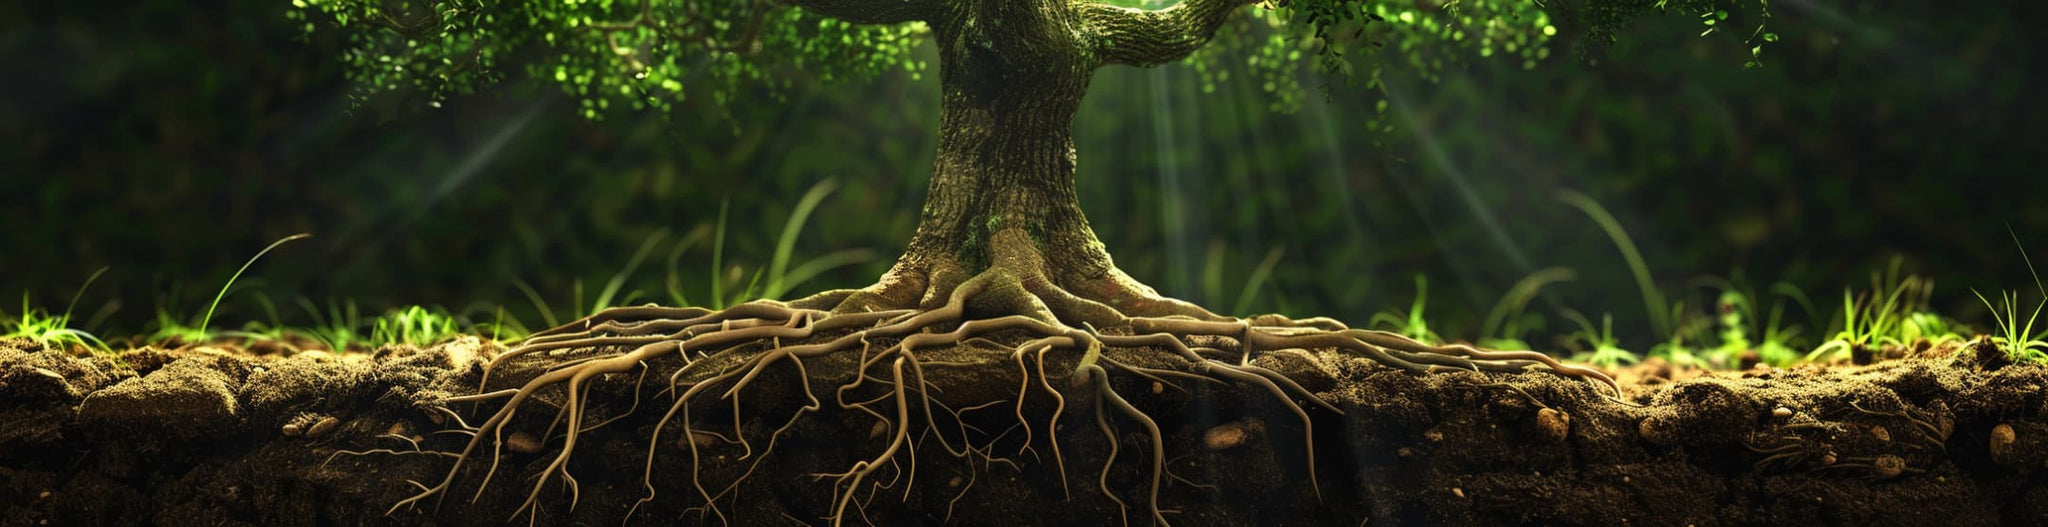 Just like a tree, your growth depends on where you draw your lines. Roots need space to spread, and so do you.